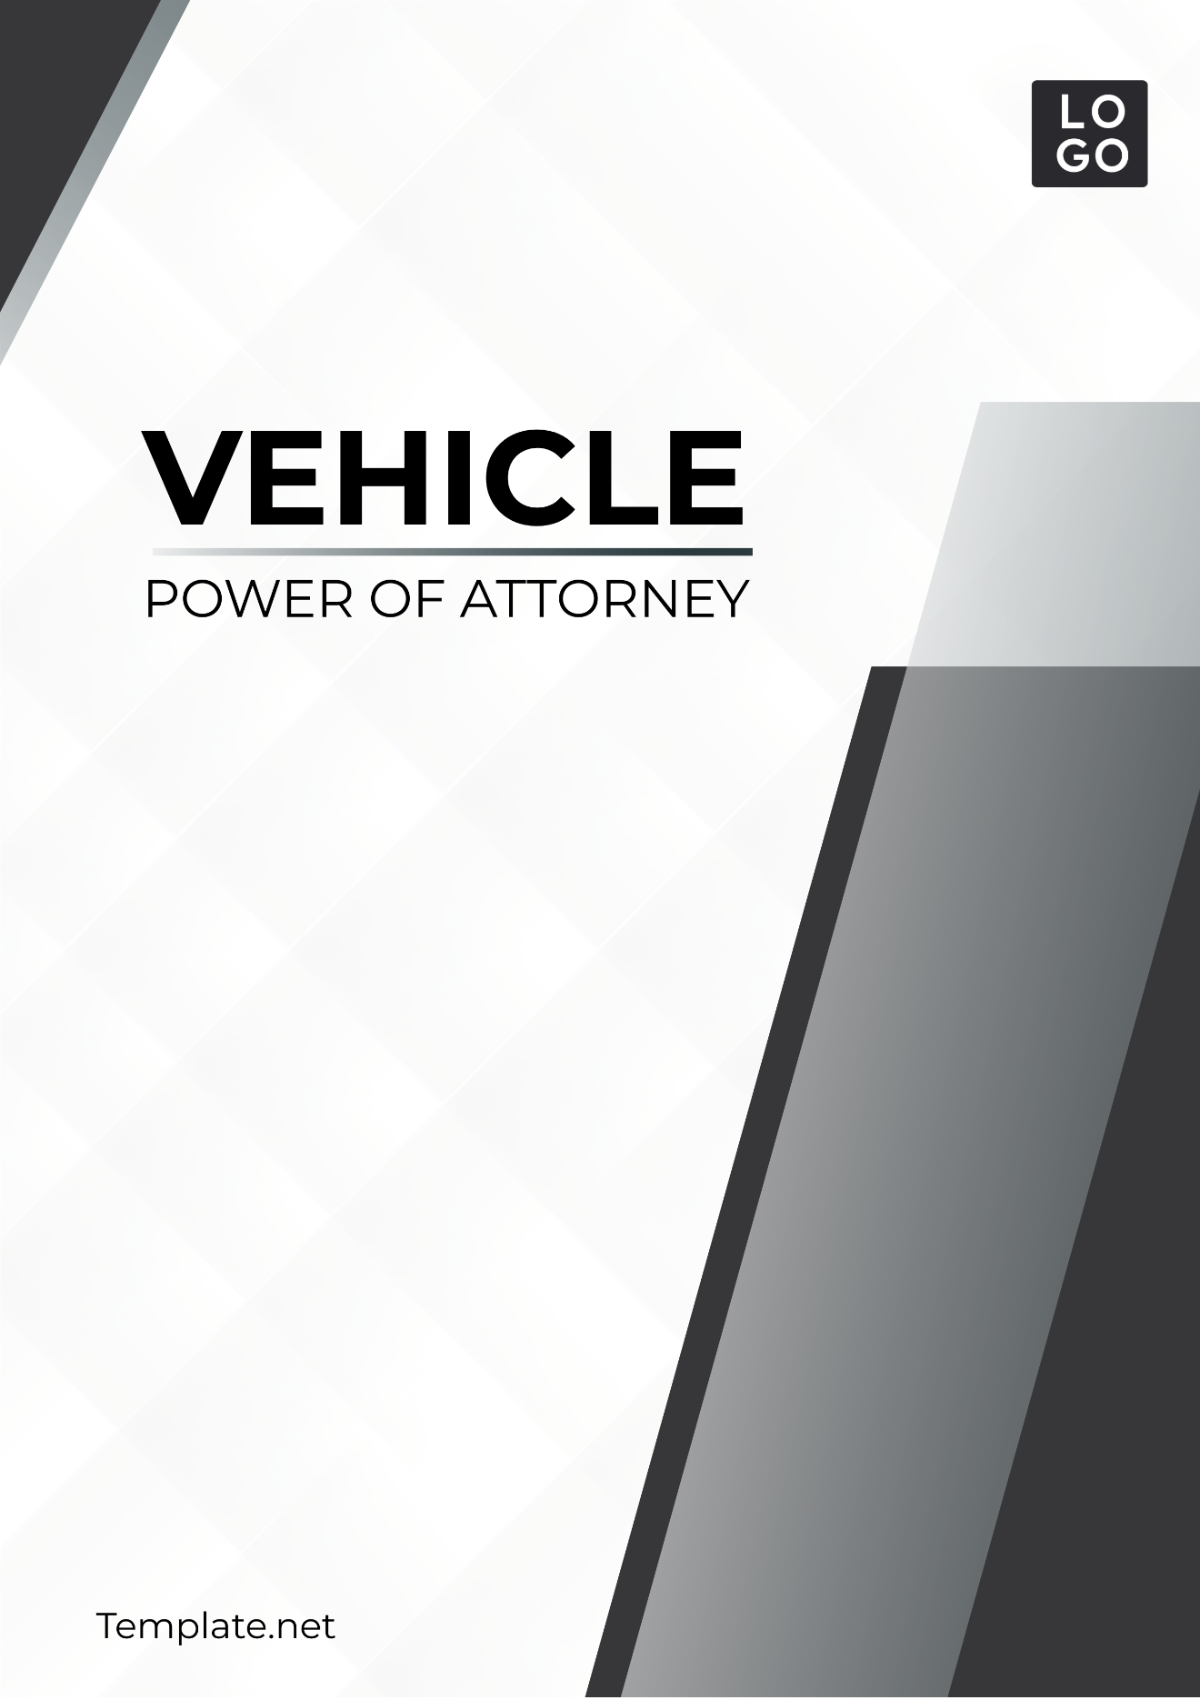 Vehicle Registration Power of Attorney Template